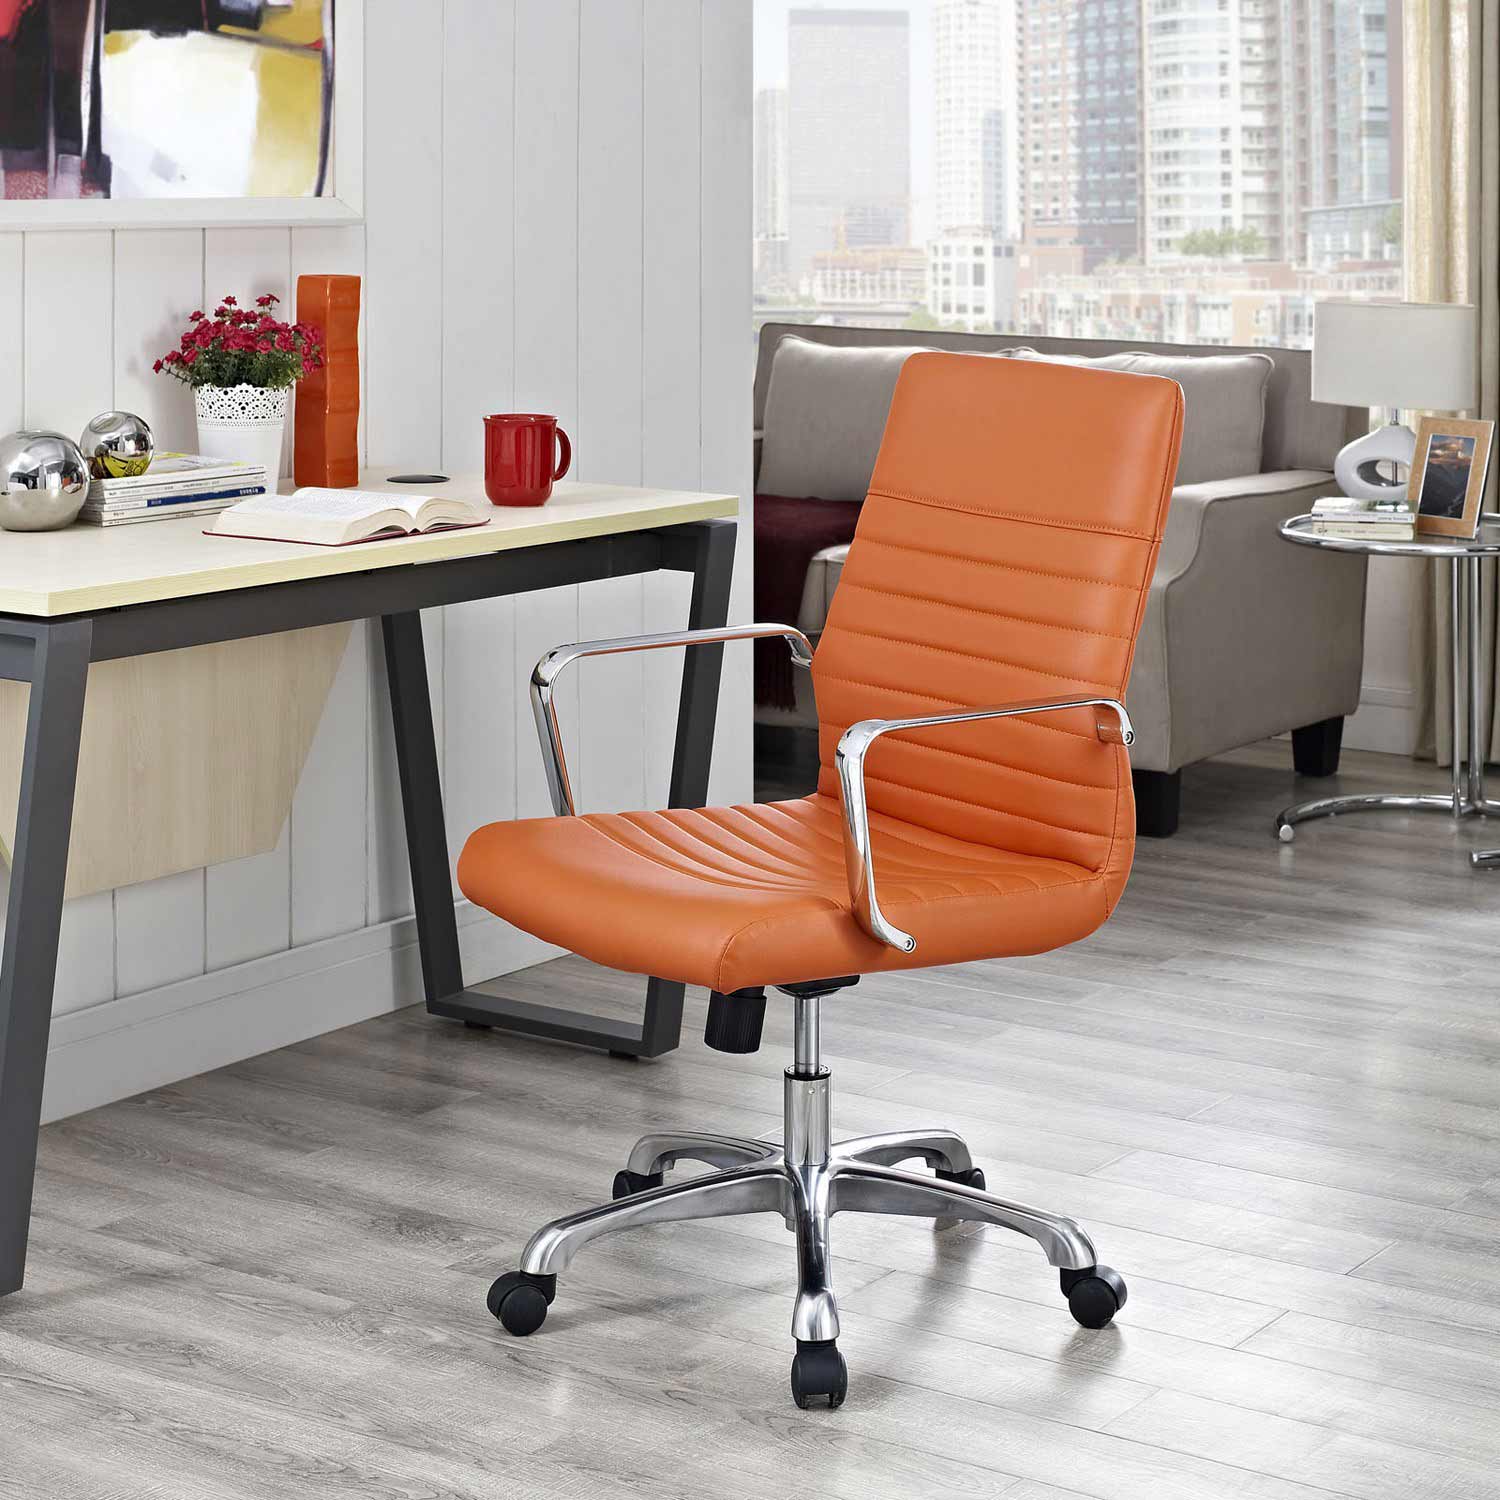 Modway Finesse Mid Back Office Chair - Orange